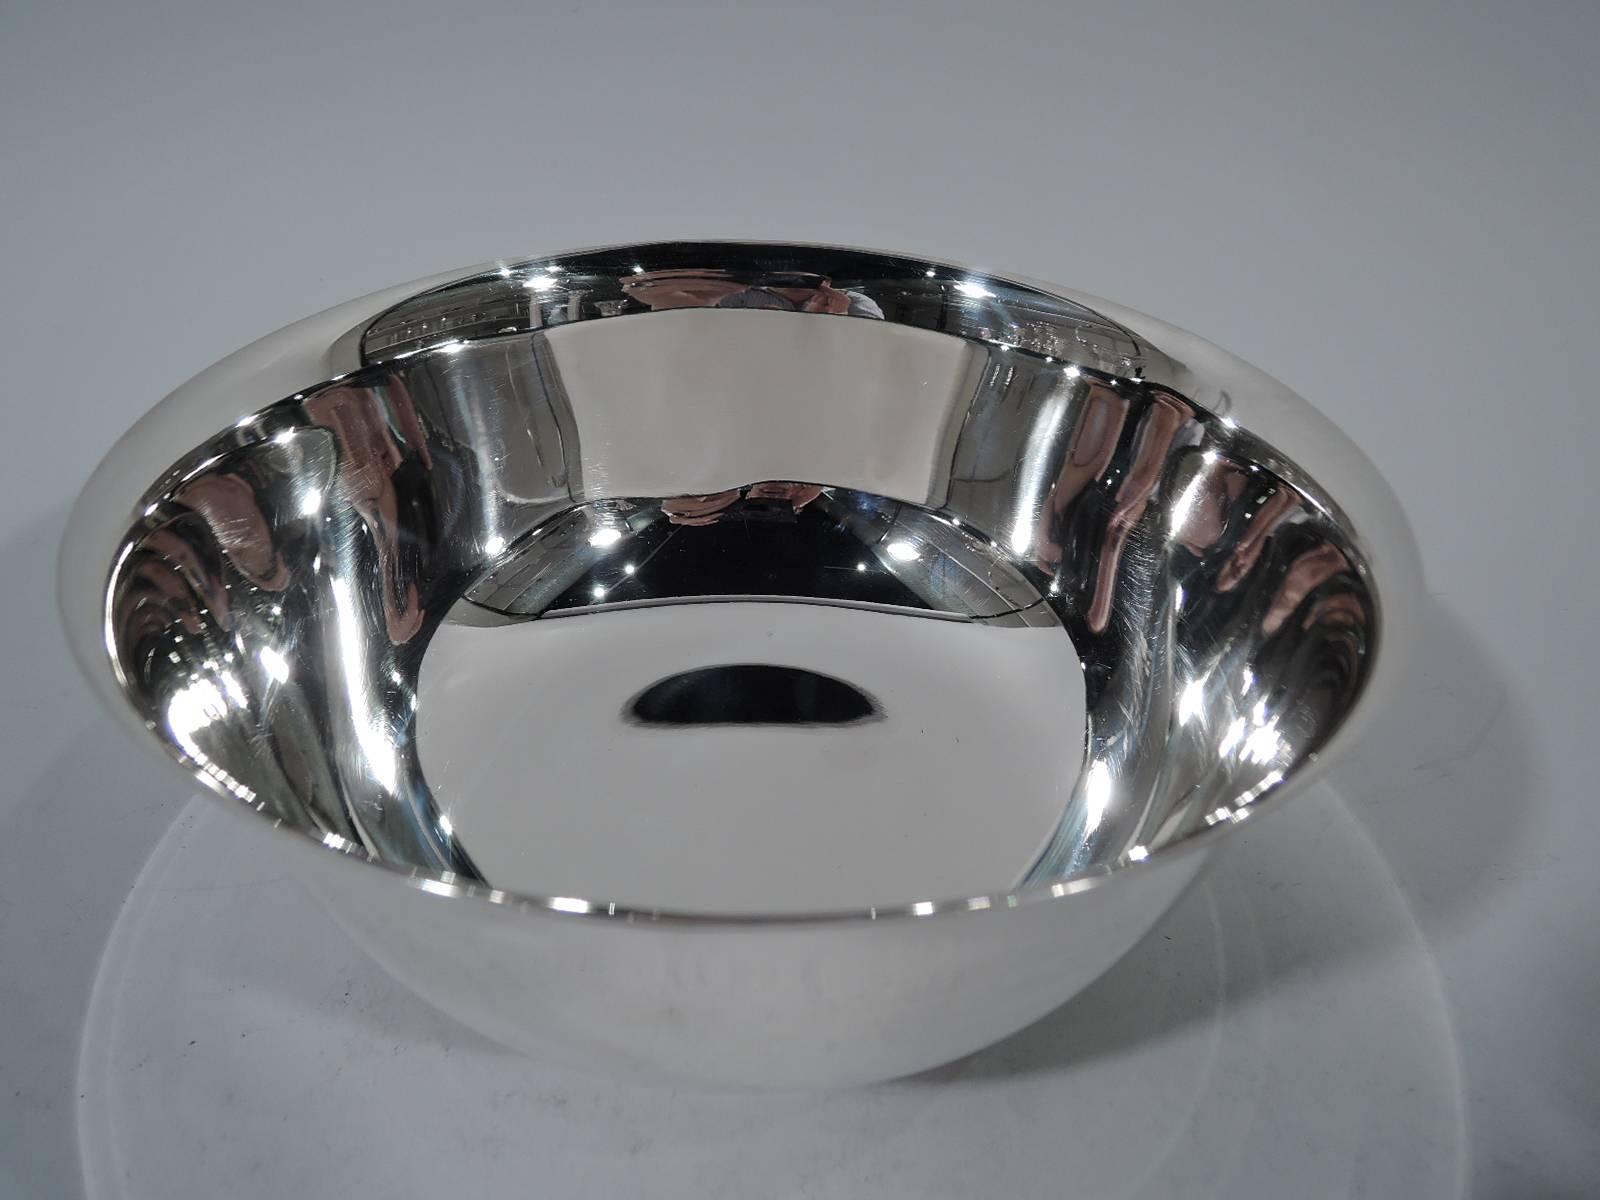 Colonial Revival Tiffany Sterling Silver Revere Bowl with Lots of Room for Engraving